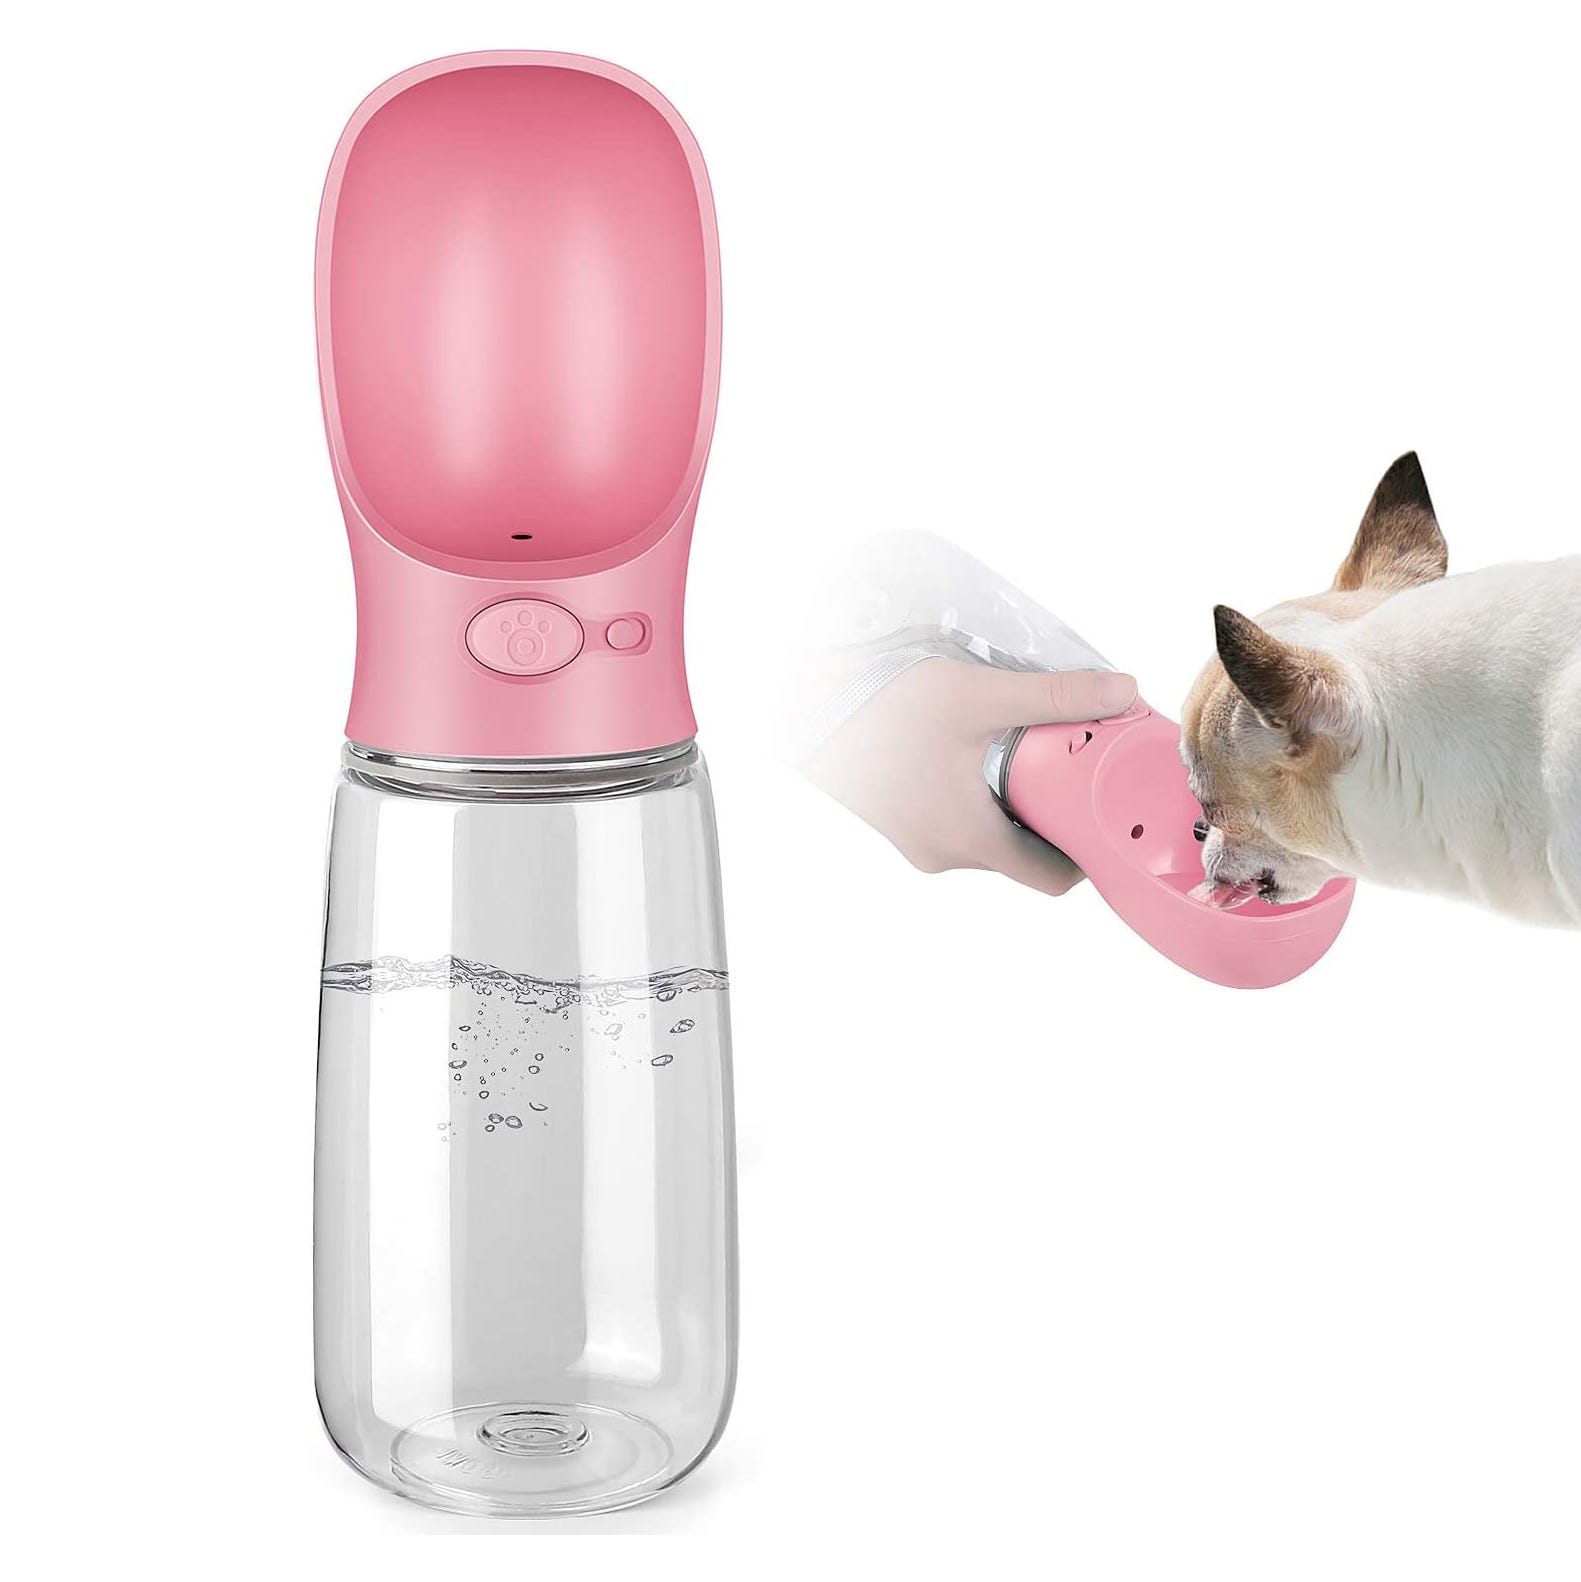 A pink portable pet water bottle with a built-in drinking bowl being used by a small dog.